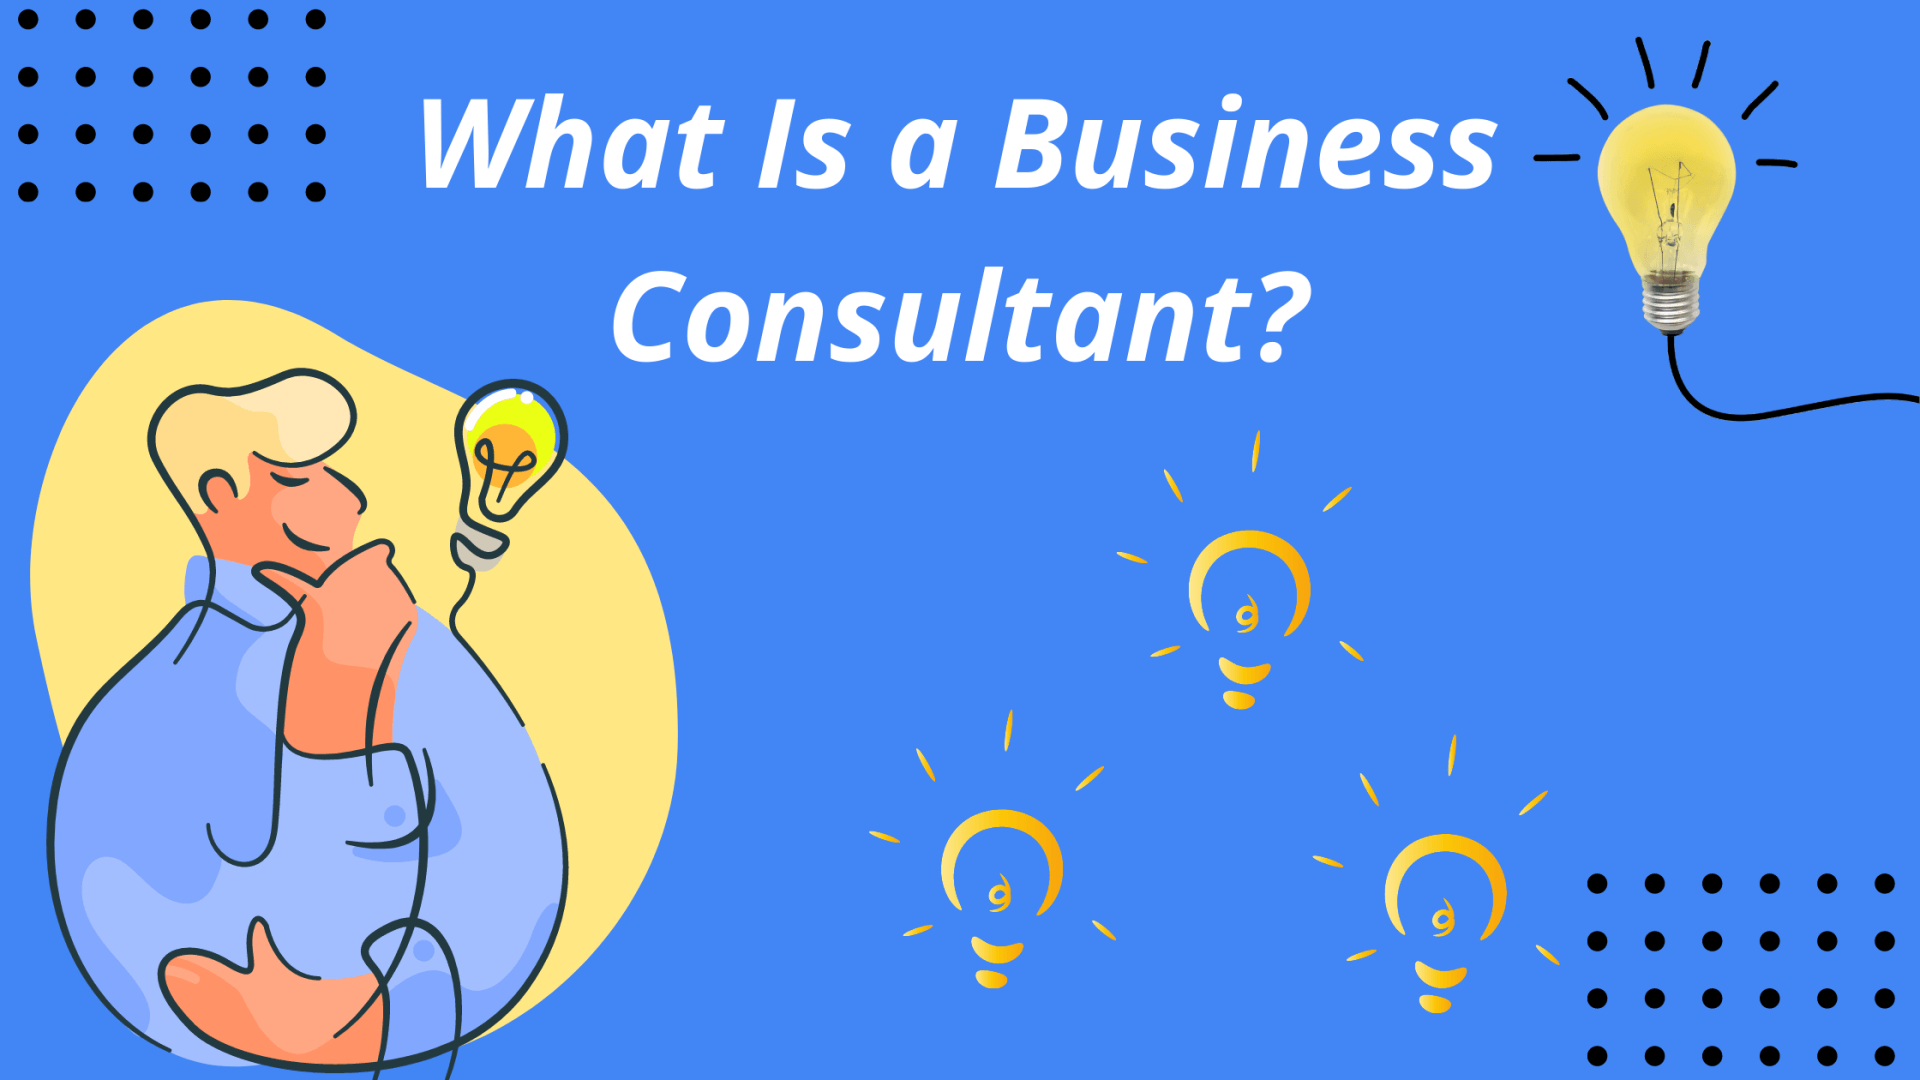 What is a business freelance consultant